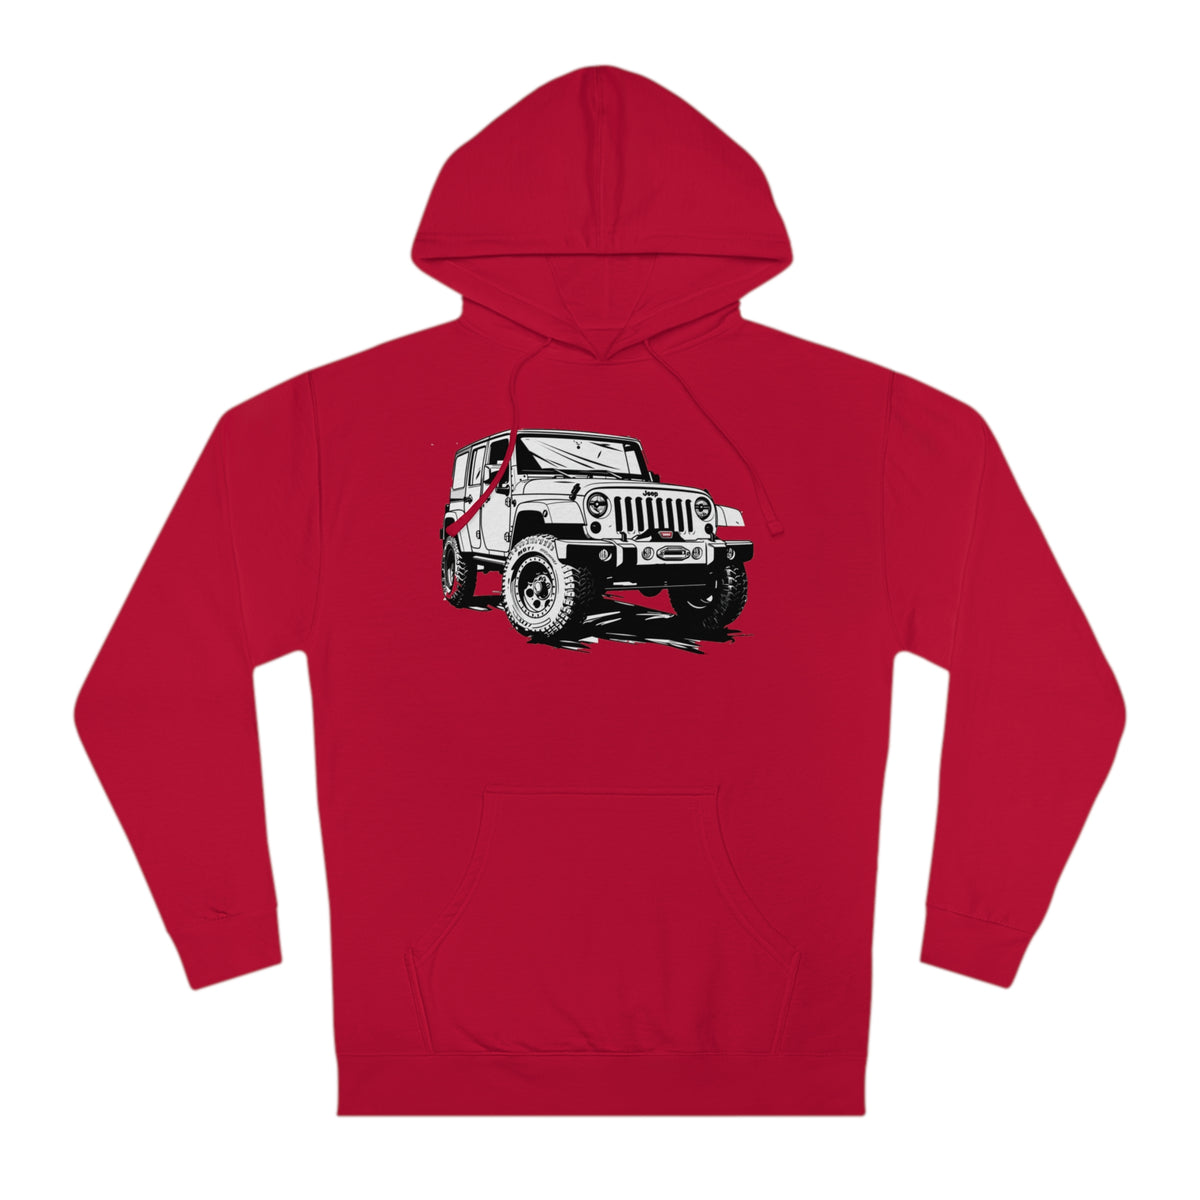 Trail Conqueror Men's Hoodie with Iconic Off-Roader Graphic Hooded Sweatshirt